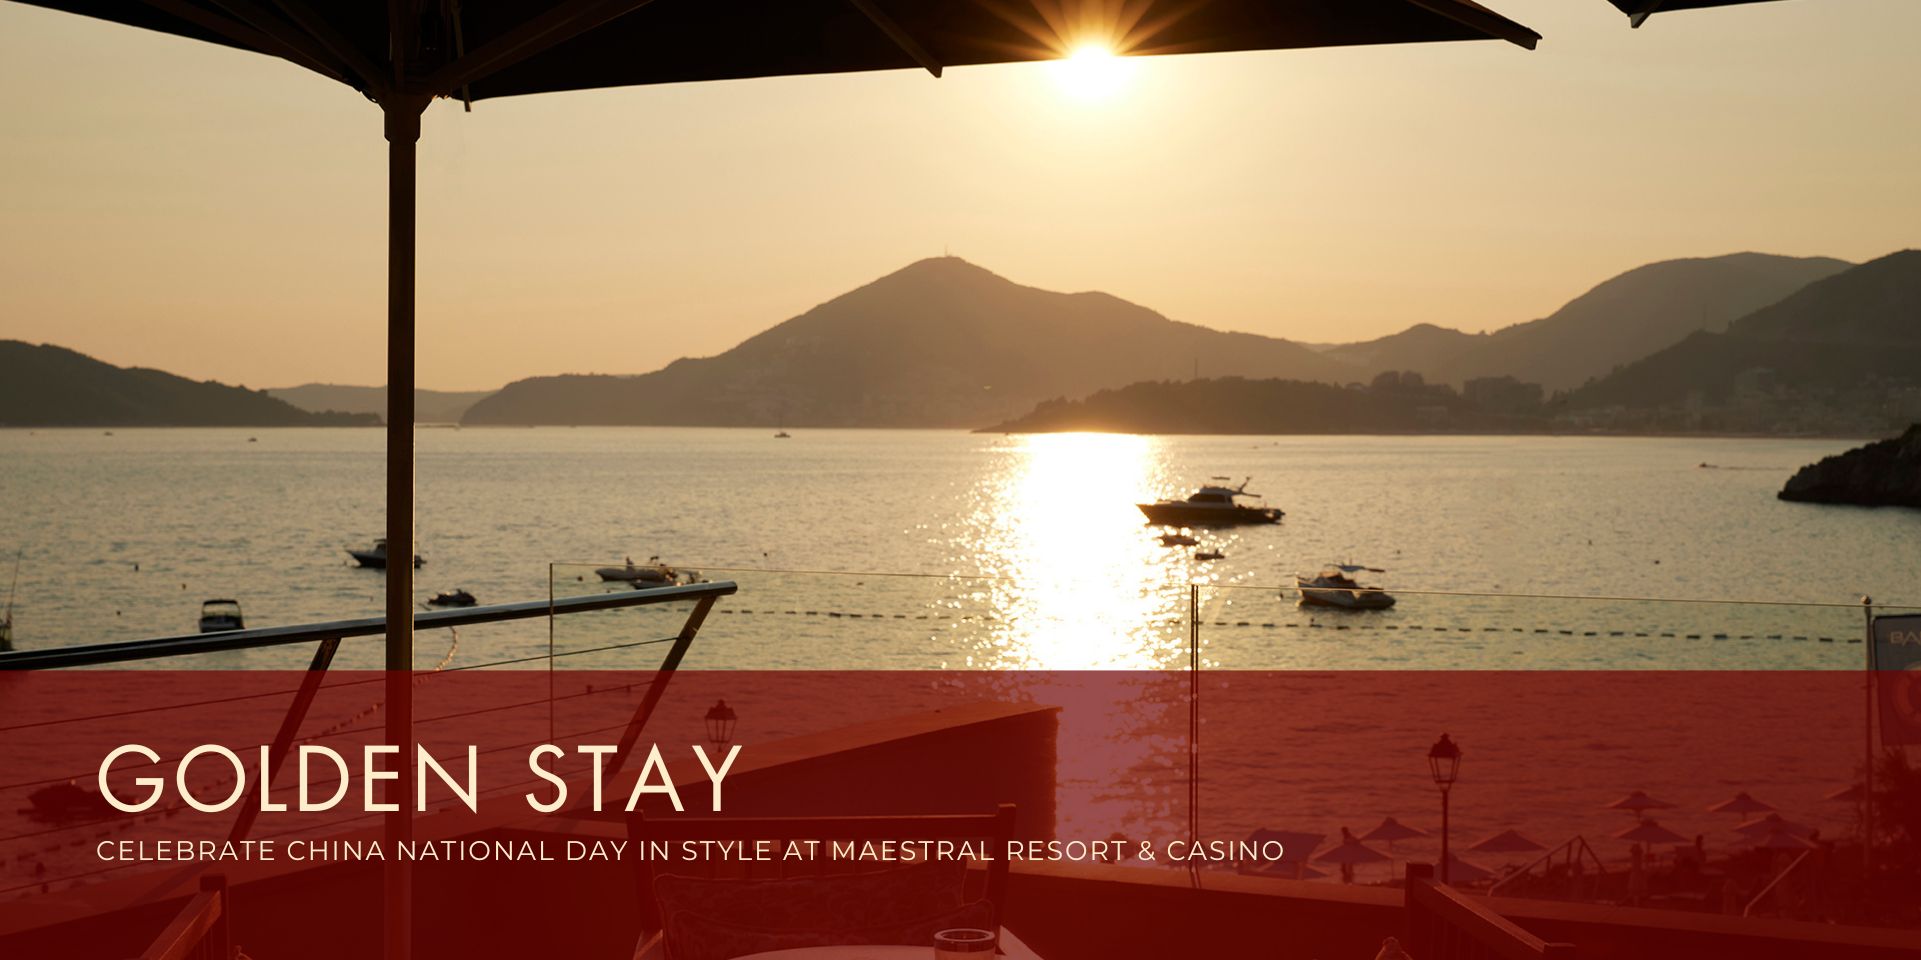 Celebrate China National Day in style at Maestral Resort & Casino